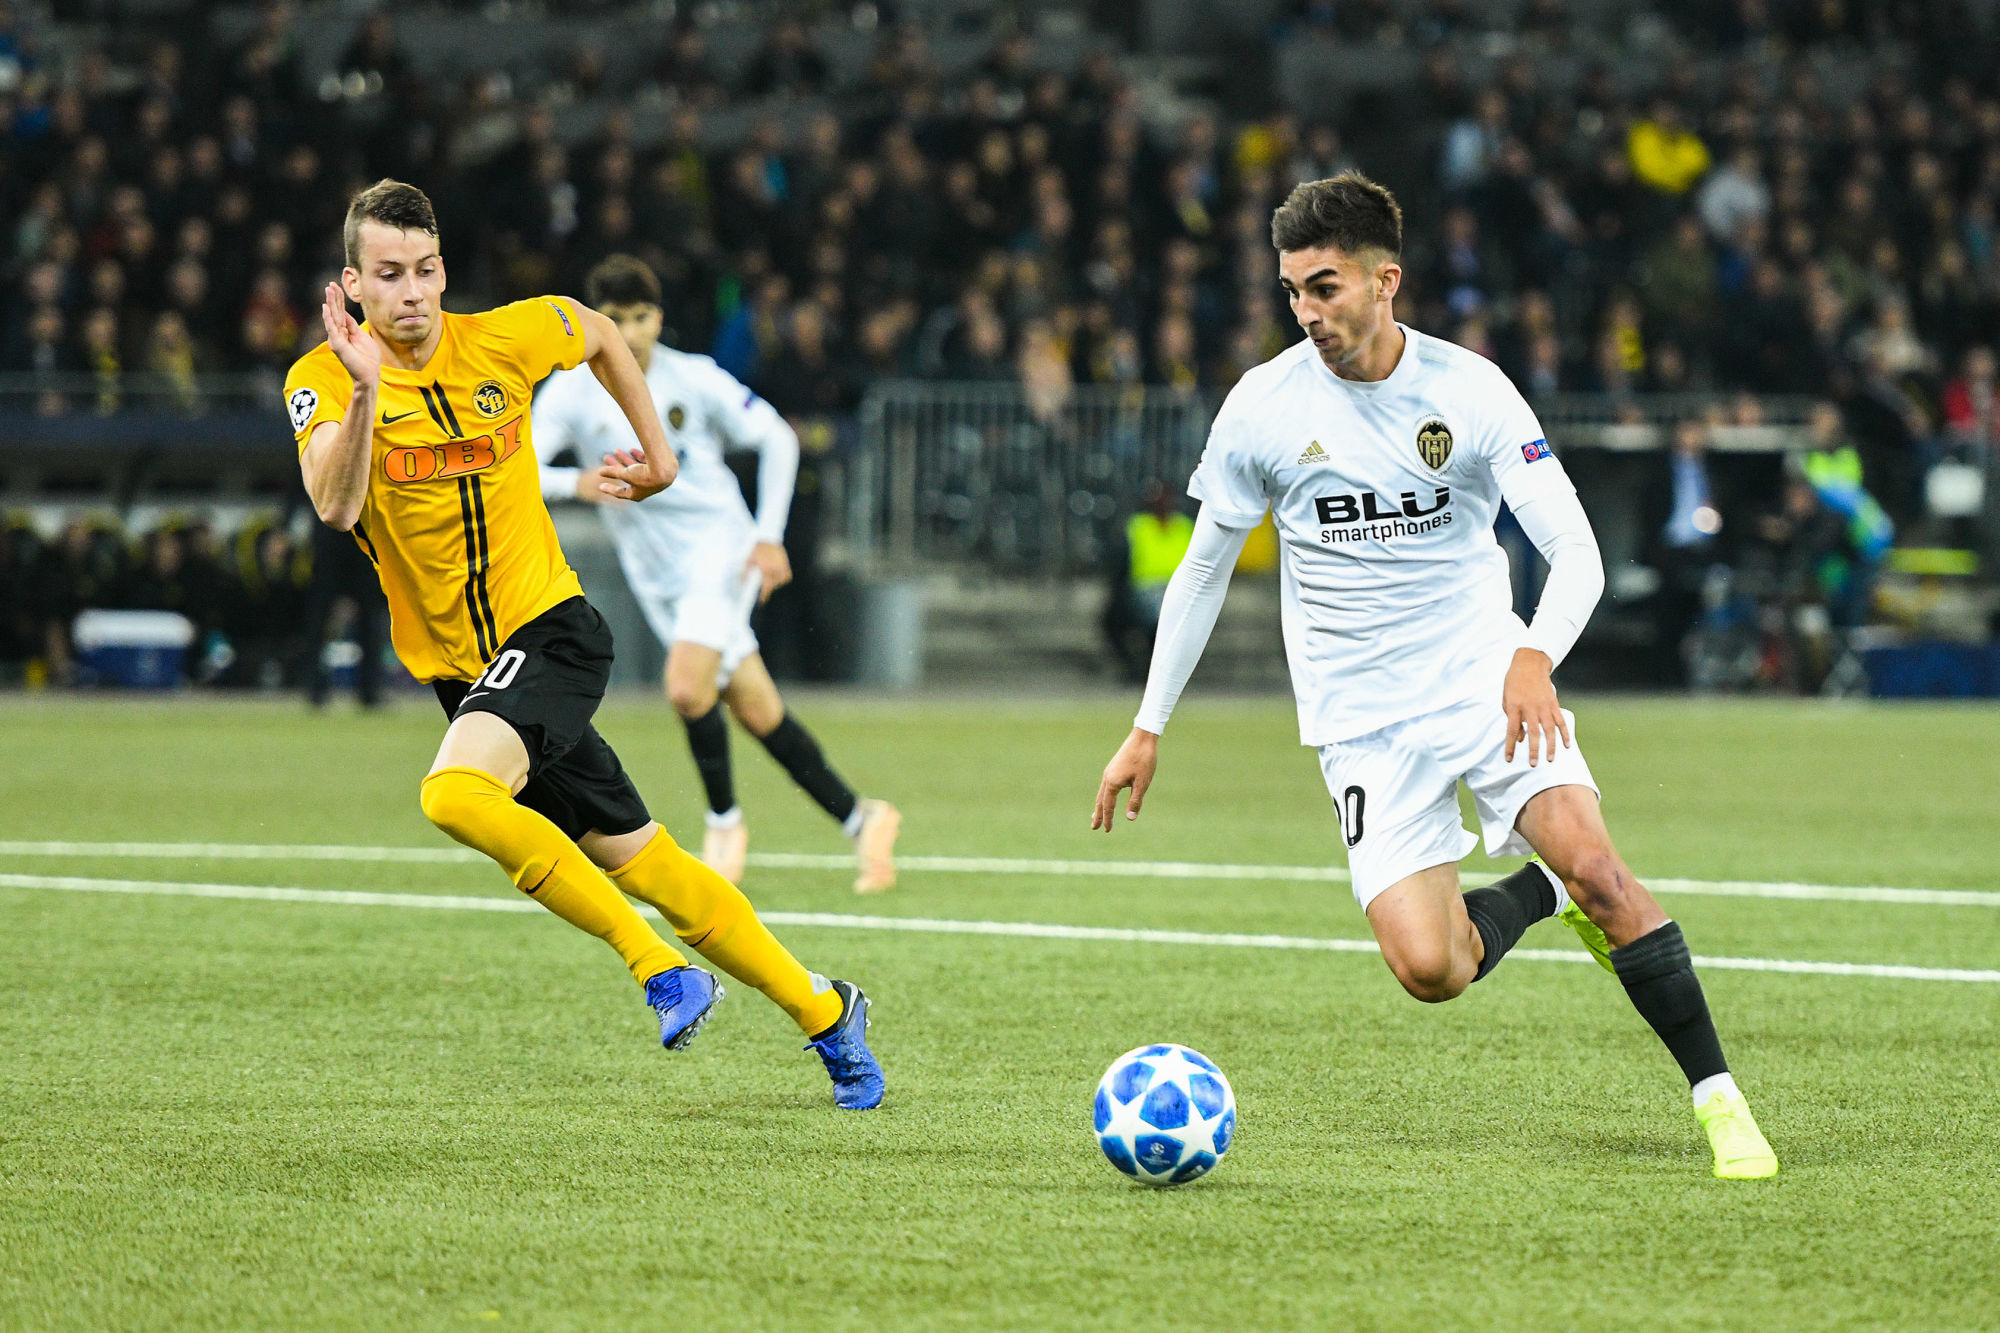 Sandro Lauper of Bern and Ferran Torres of Valencia during the UEFA Champions League match between Young Boys Berne and Valence CF on October 23, 2018 in Bern, Switzerland. (Photo by Sebastien Bozon/Icon Sport)